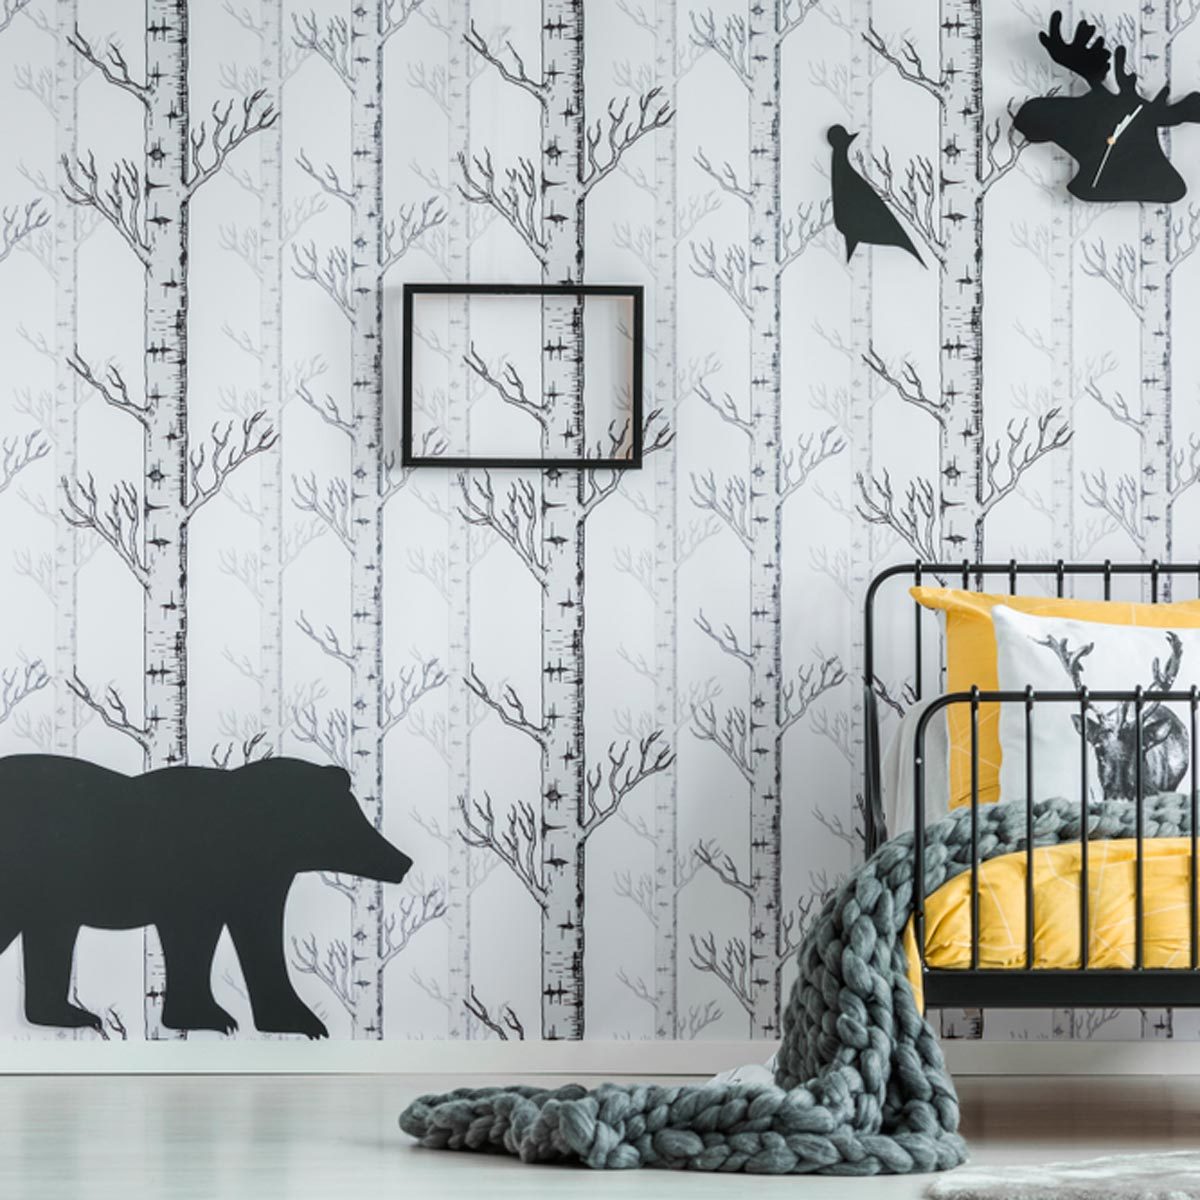 10 Stunning Black And White Bedroom Ideas For Kids